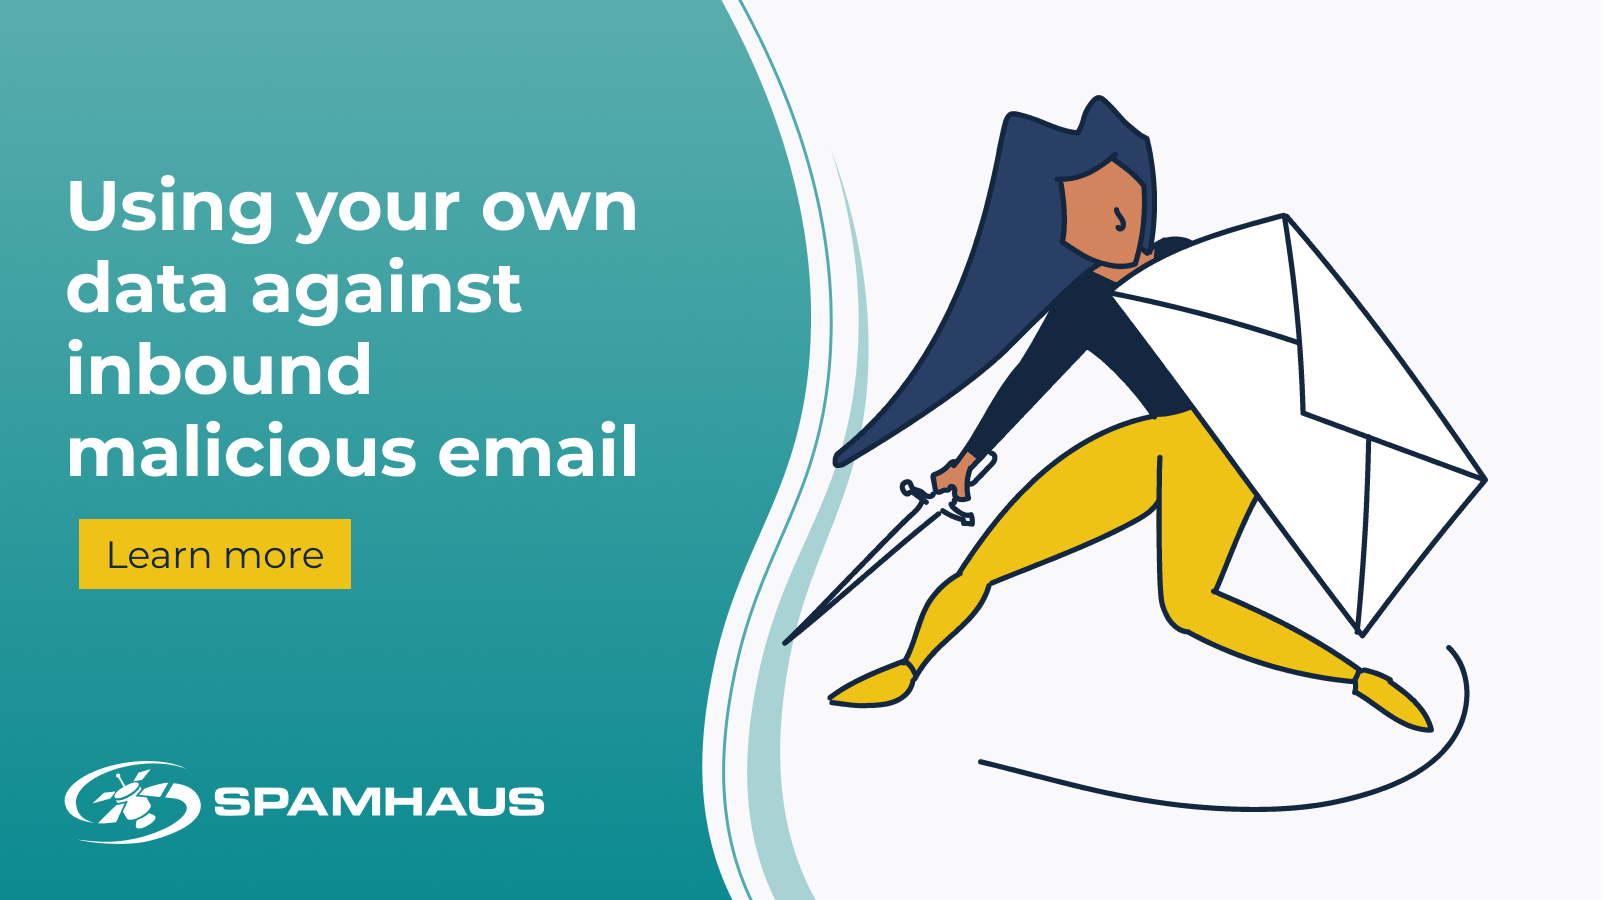 Using your own data against inbound malicious email